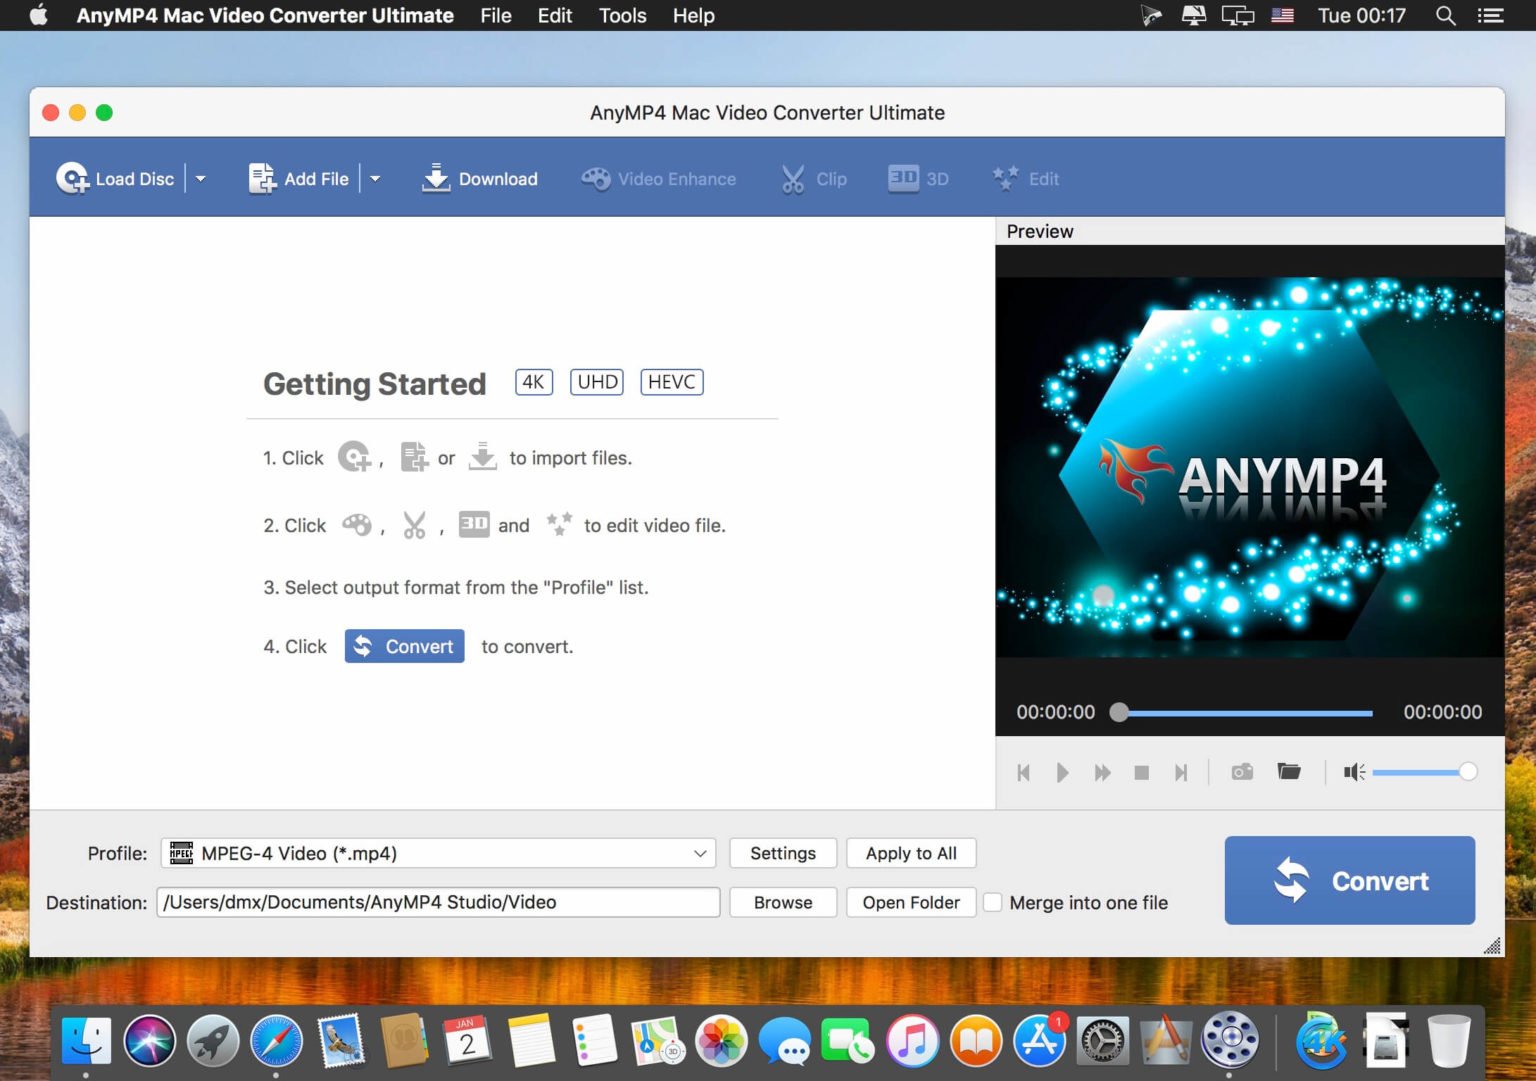 anymp4 video converter ultimate portable 7.2.60